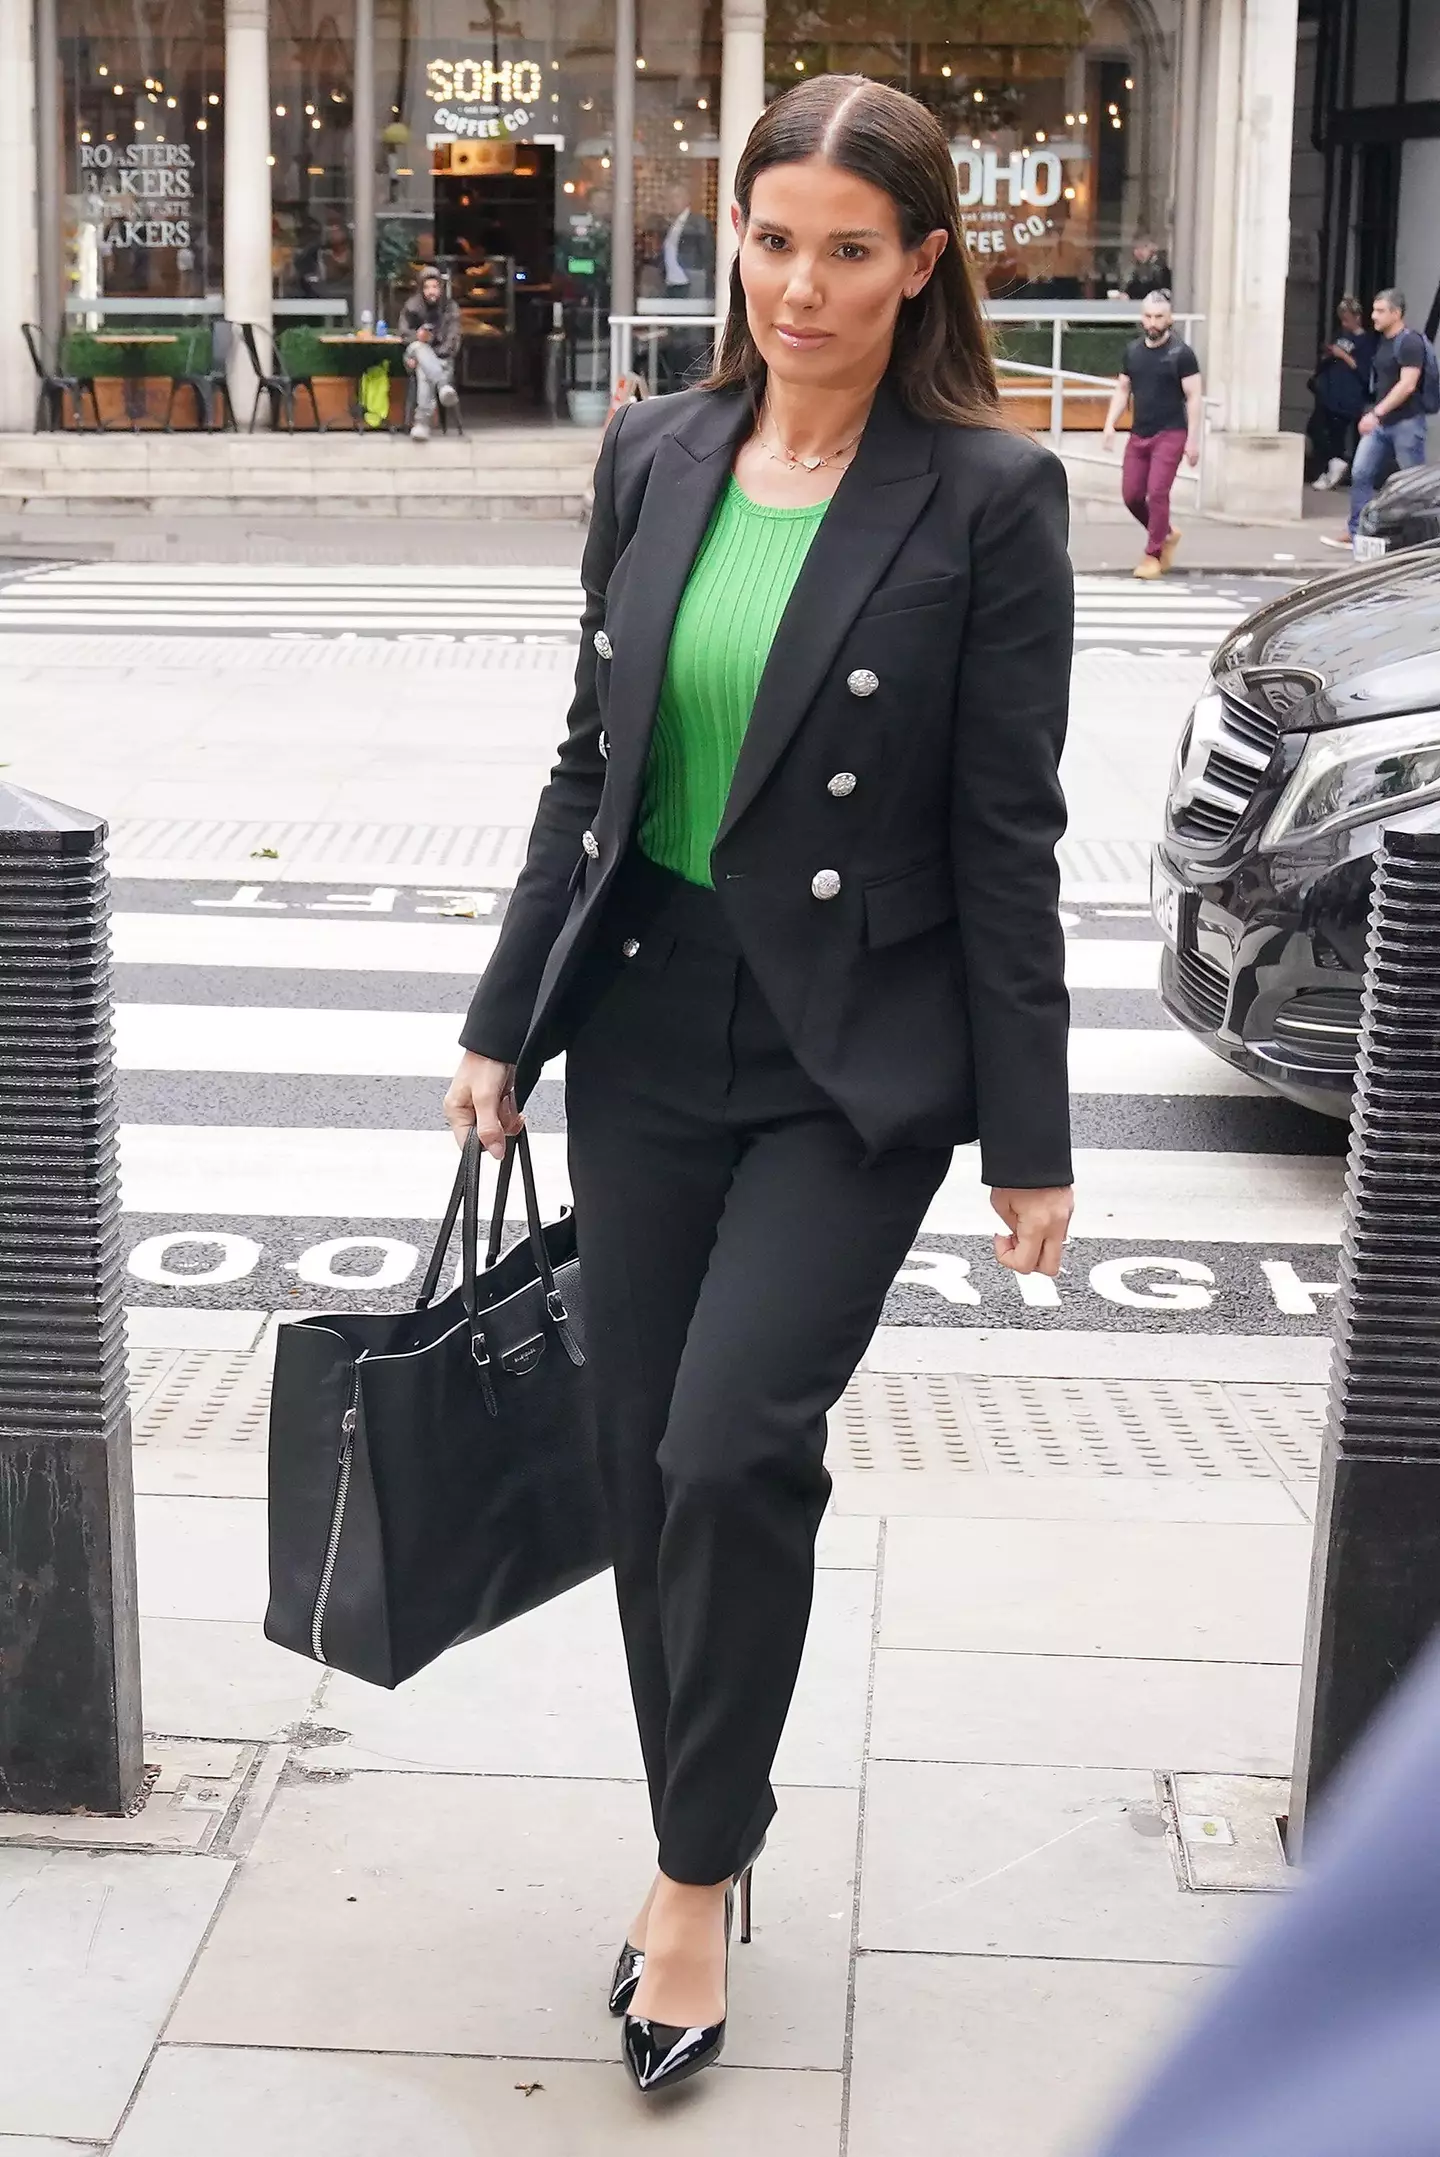 Rebekah Vardy arriving at court for the final day of the 'Wagatha Christie' trial.